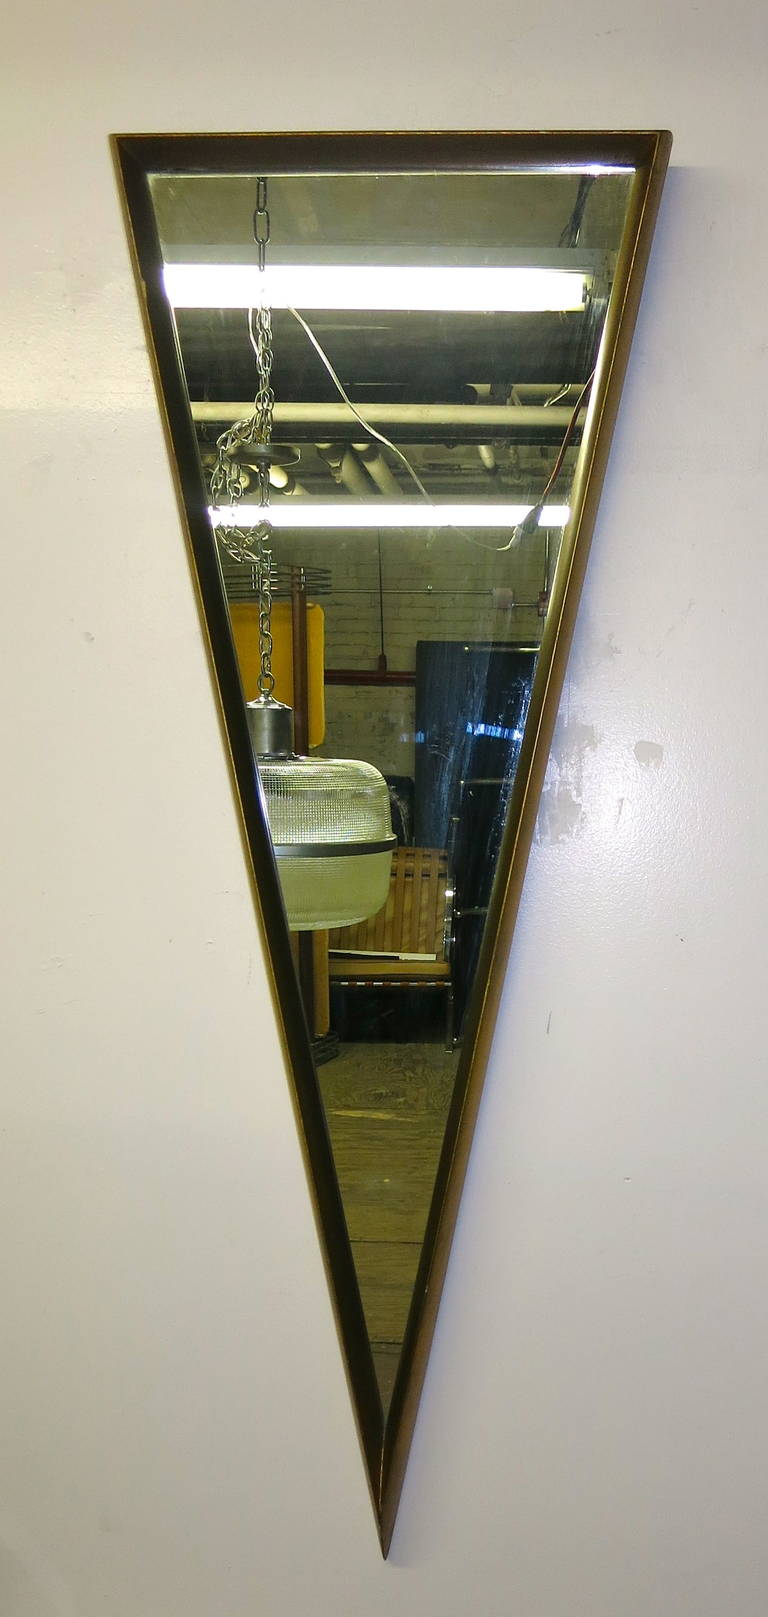 Triangular mirror framed in gold leafed 2-inch thick wood. The mirror can hang with the point up or down.